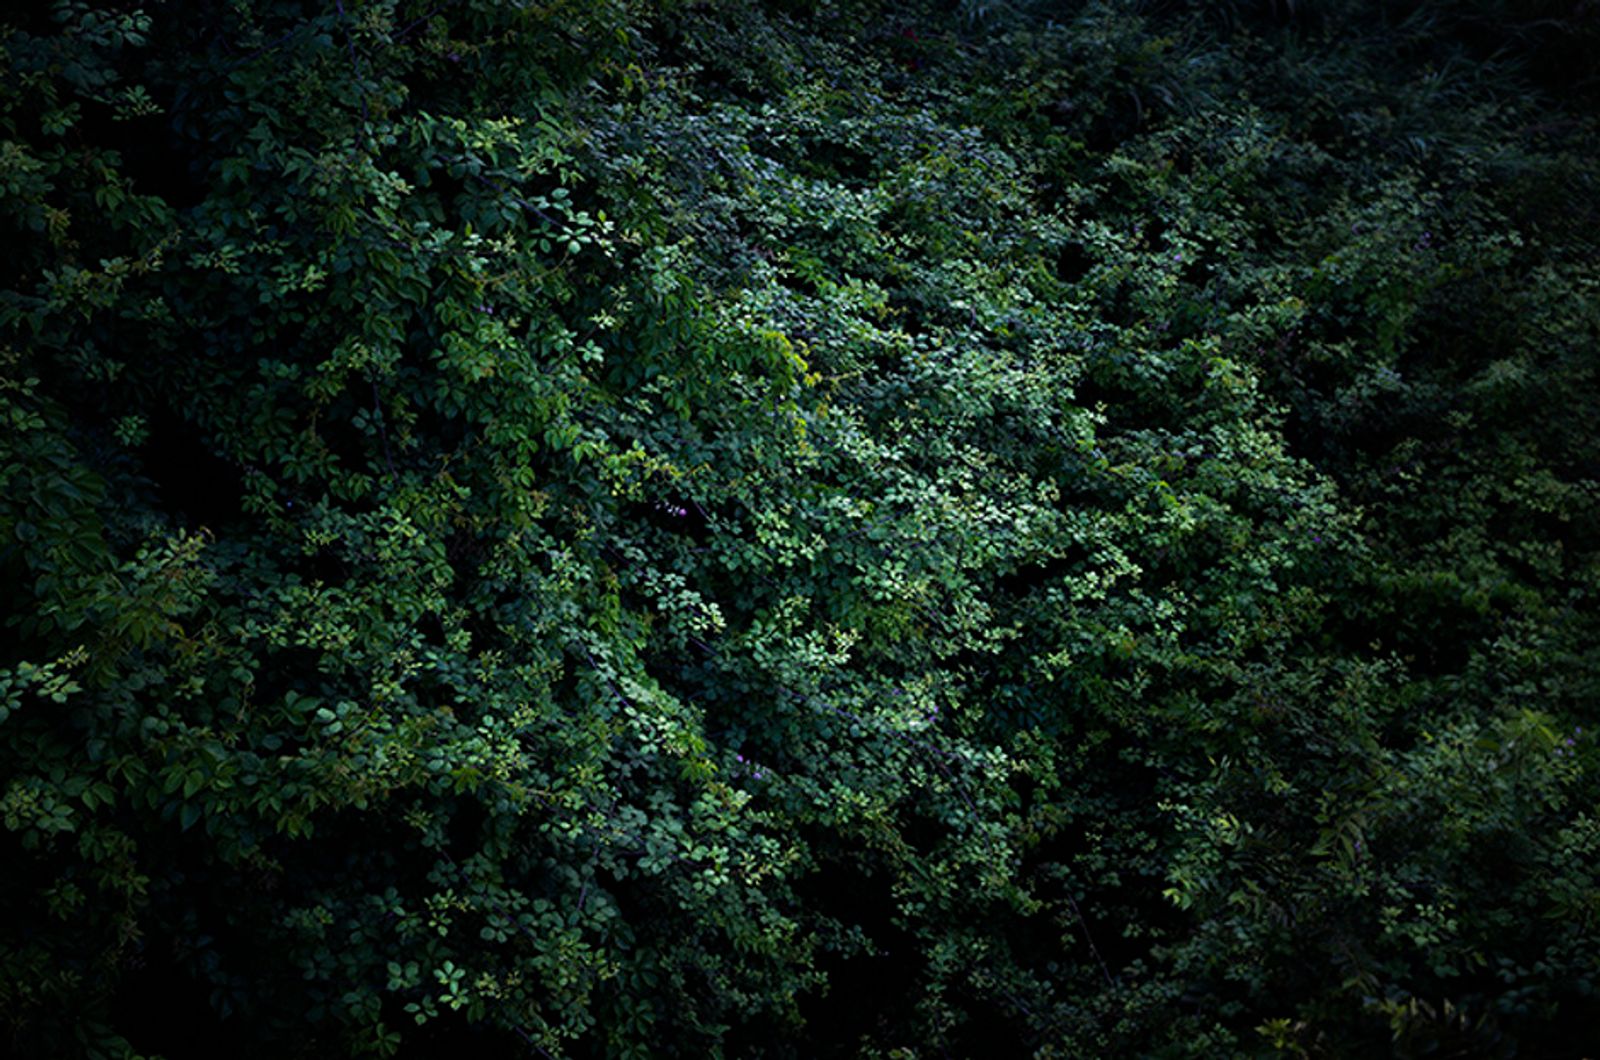 © Eli Garmendia - Image from the Sleeping Forest  photography project